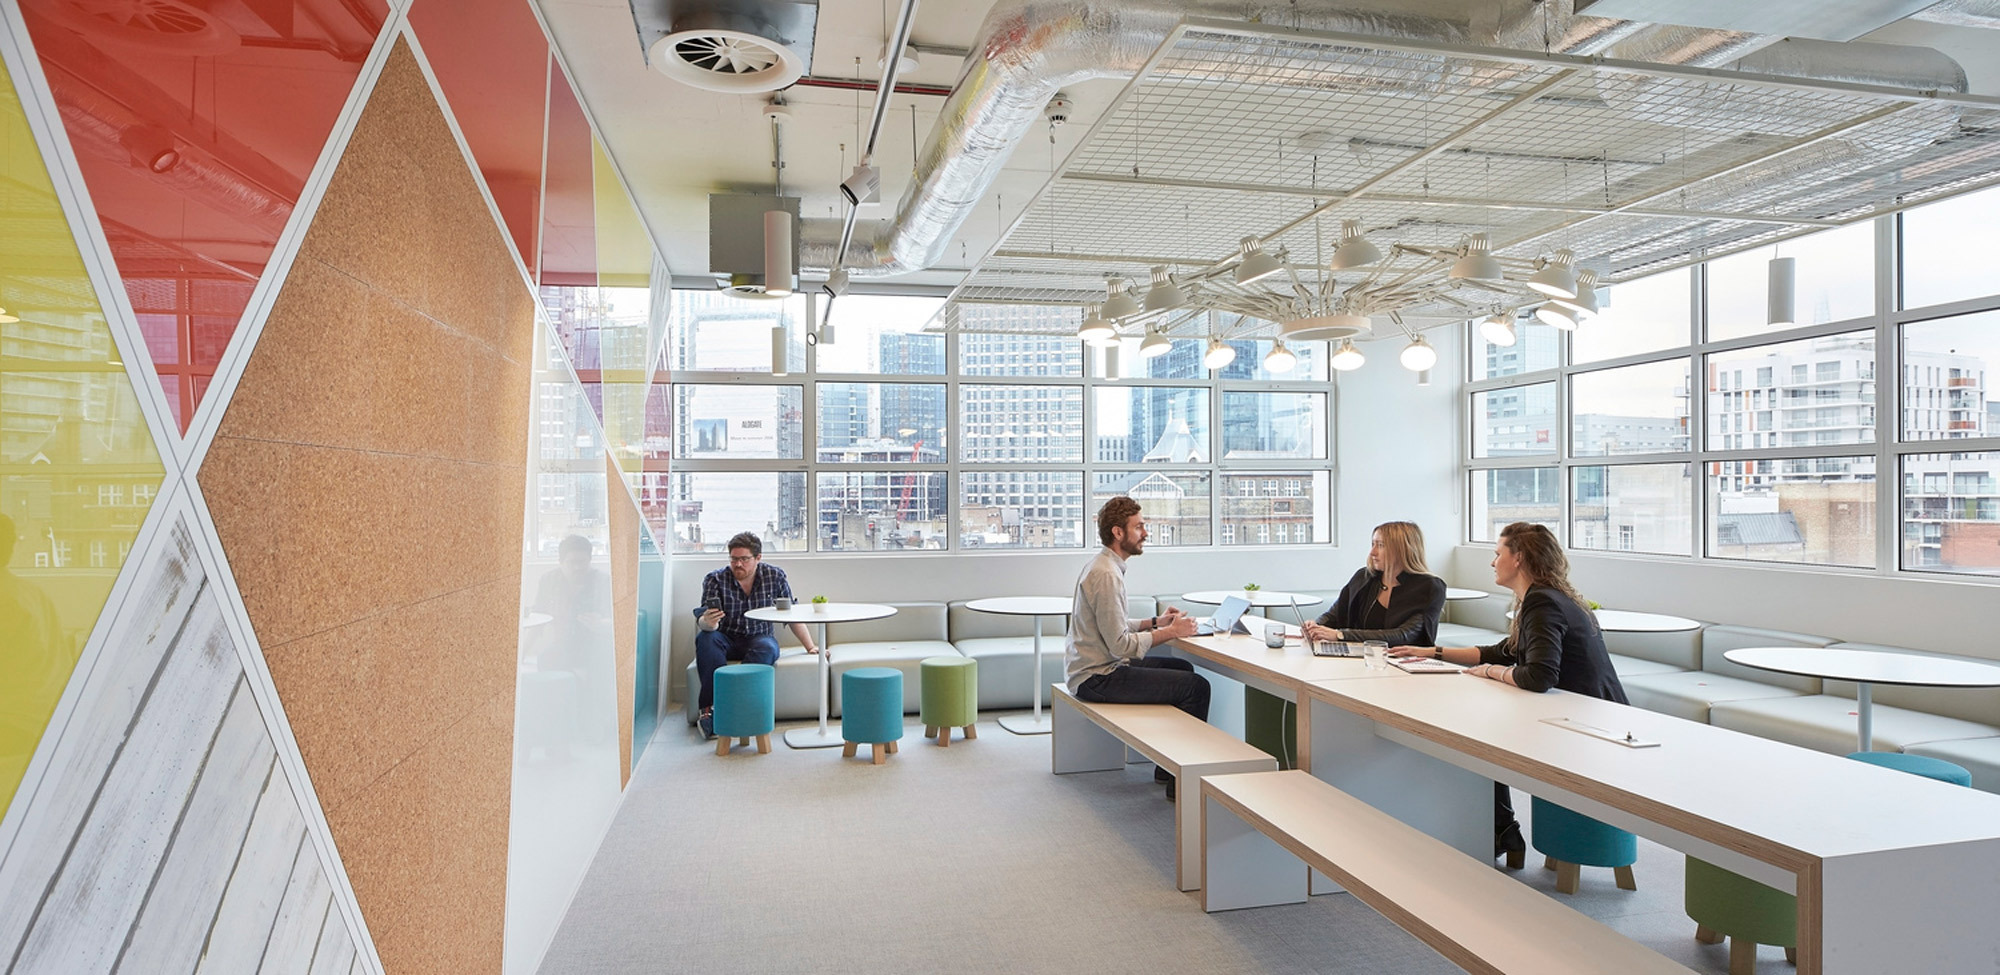 Modern office space boasting an open floor plan with exposed ceiling ductwork, incorporating natural light through large windows. Vibrant color blocks on glass partitions blend with neutral tones, while varied seating options foster collaborative and individual workstations.